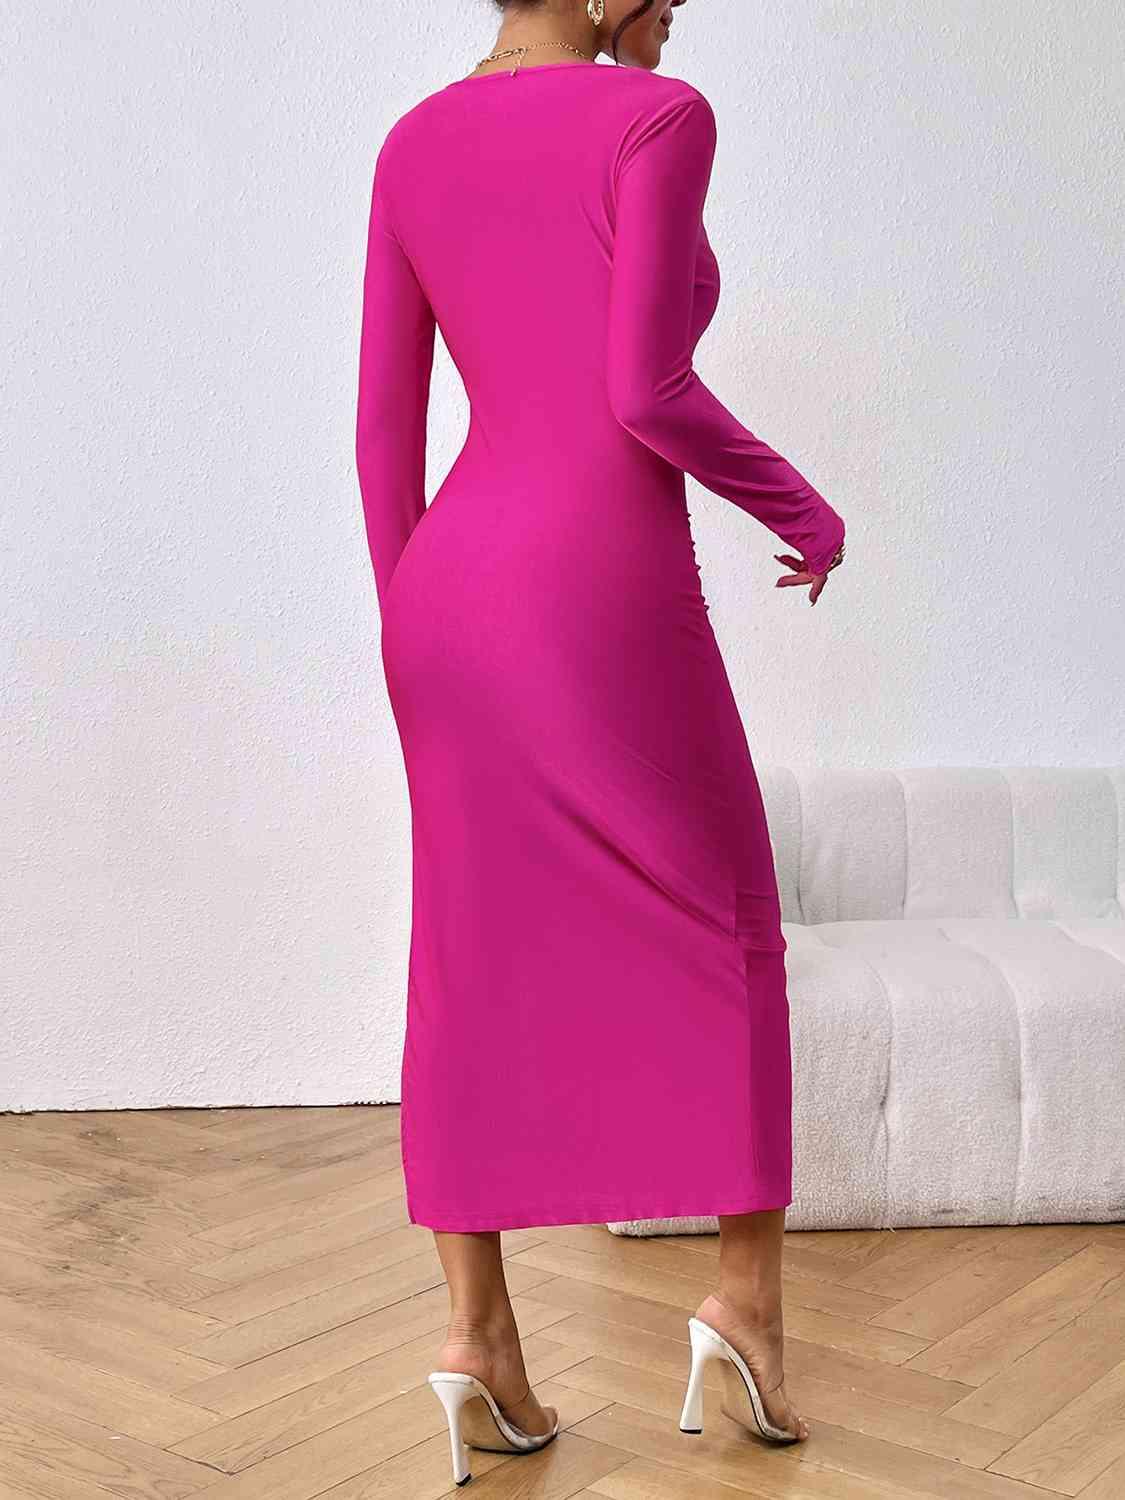 a woman in a bright pink dress